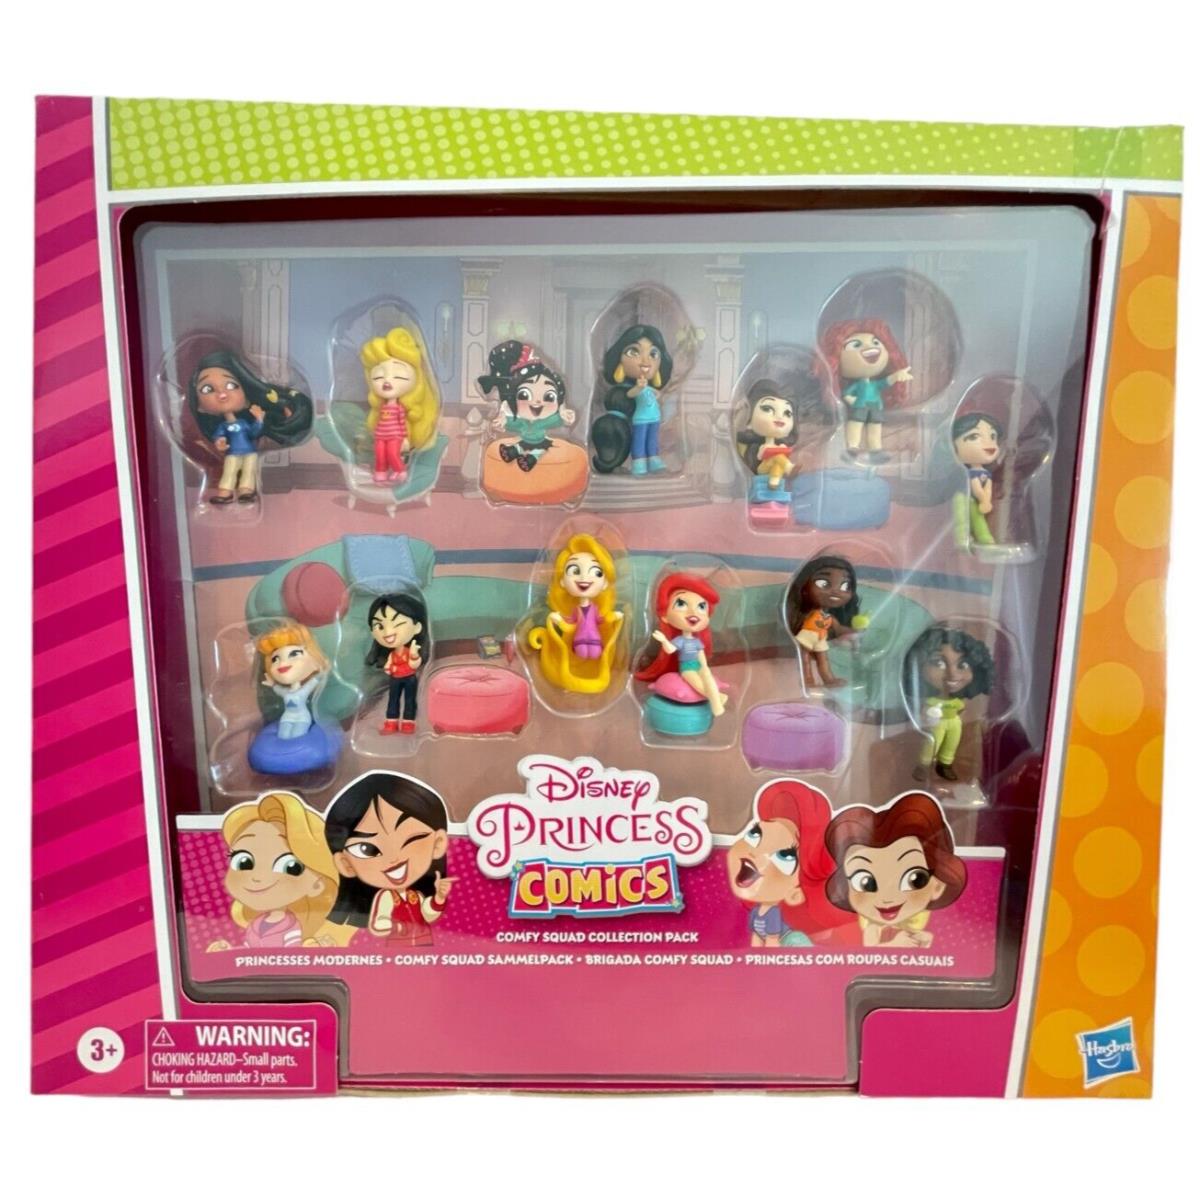 Disney Princess Comics Comfy Squad Collection Pack of 12 Doll Figures